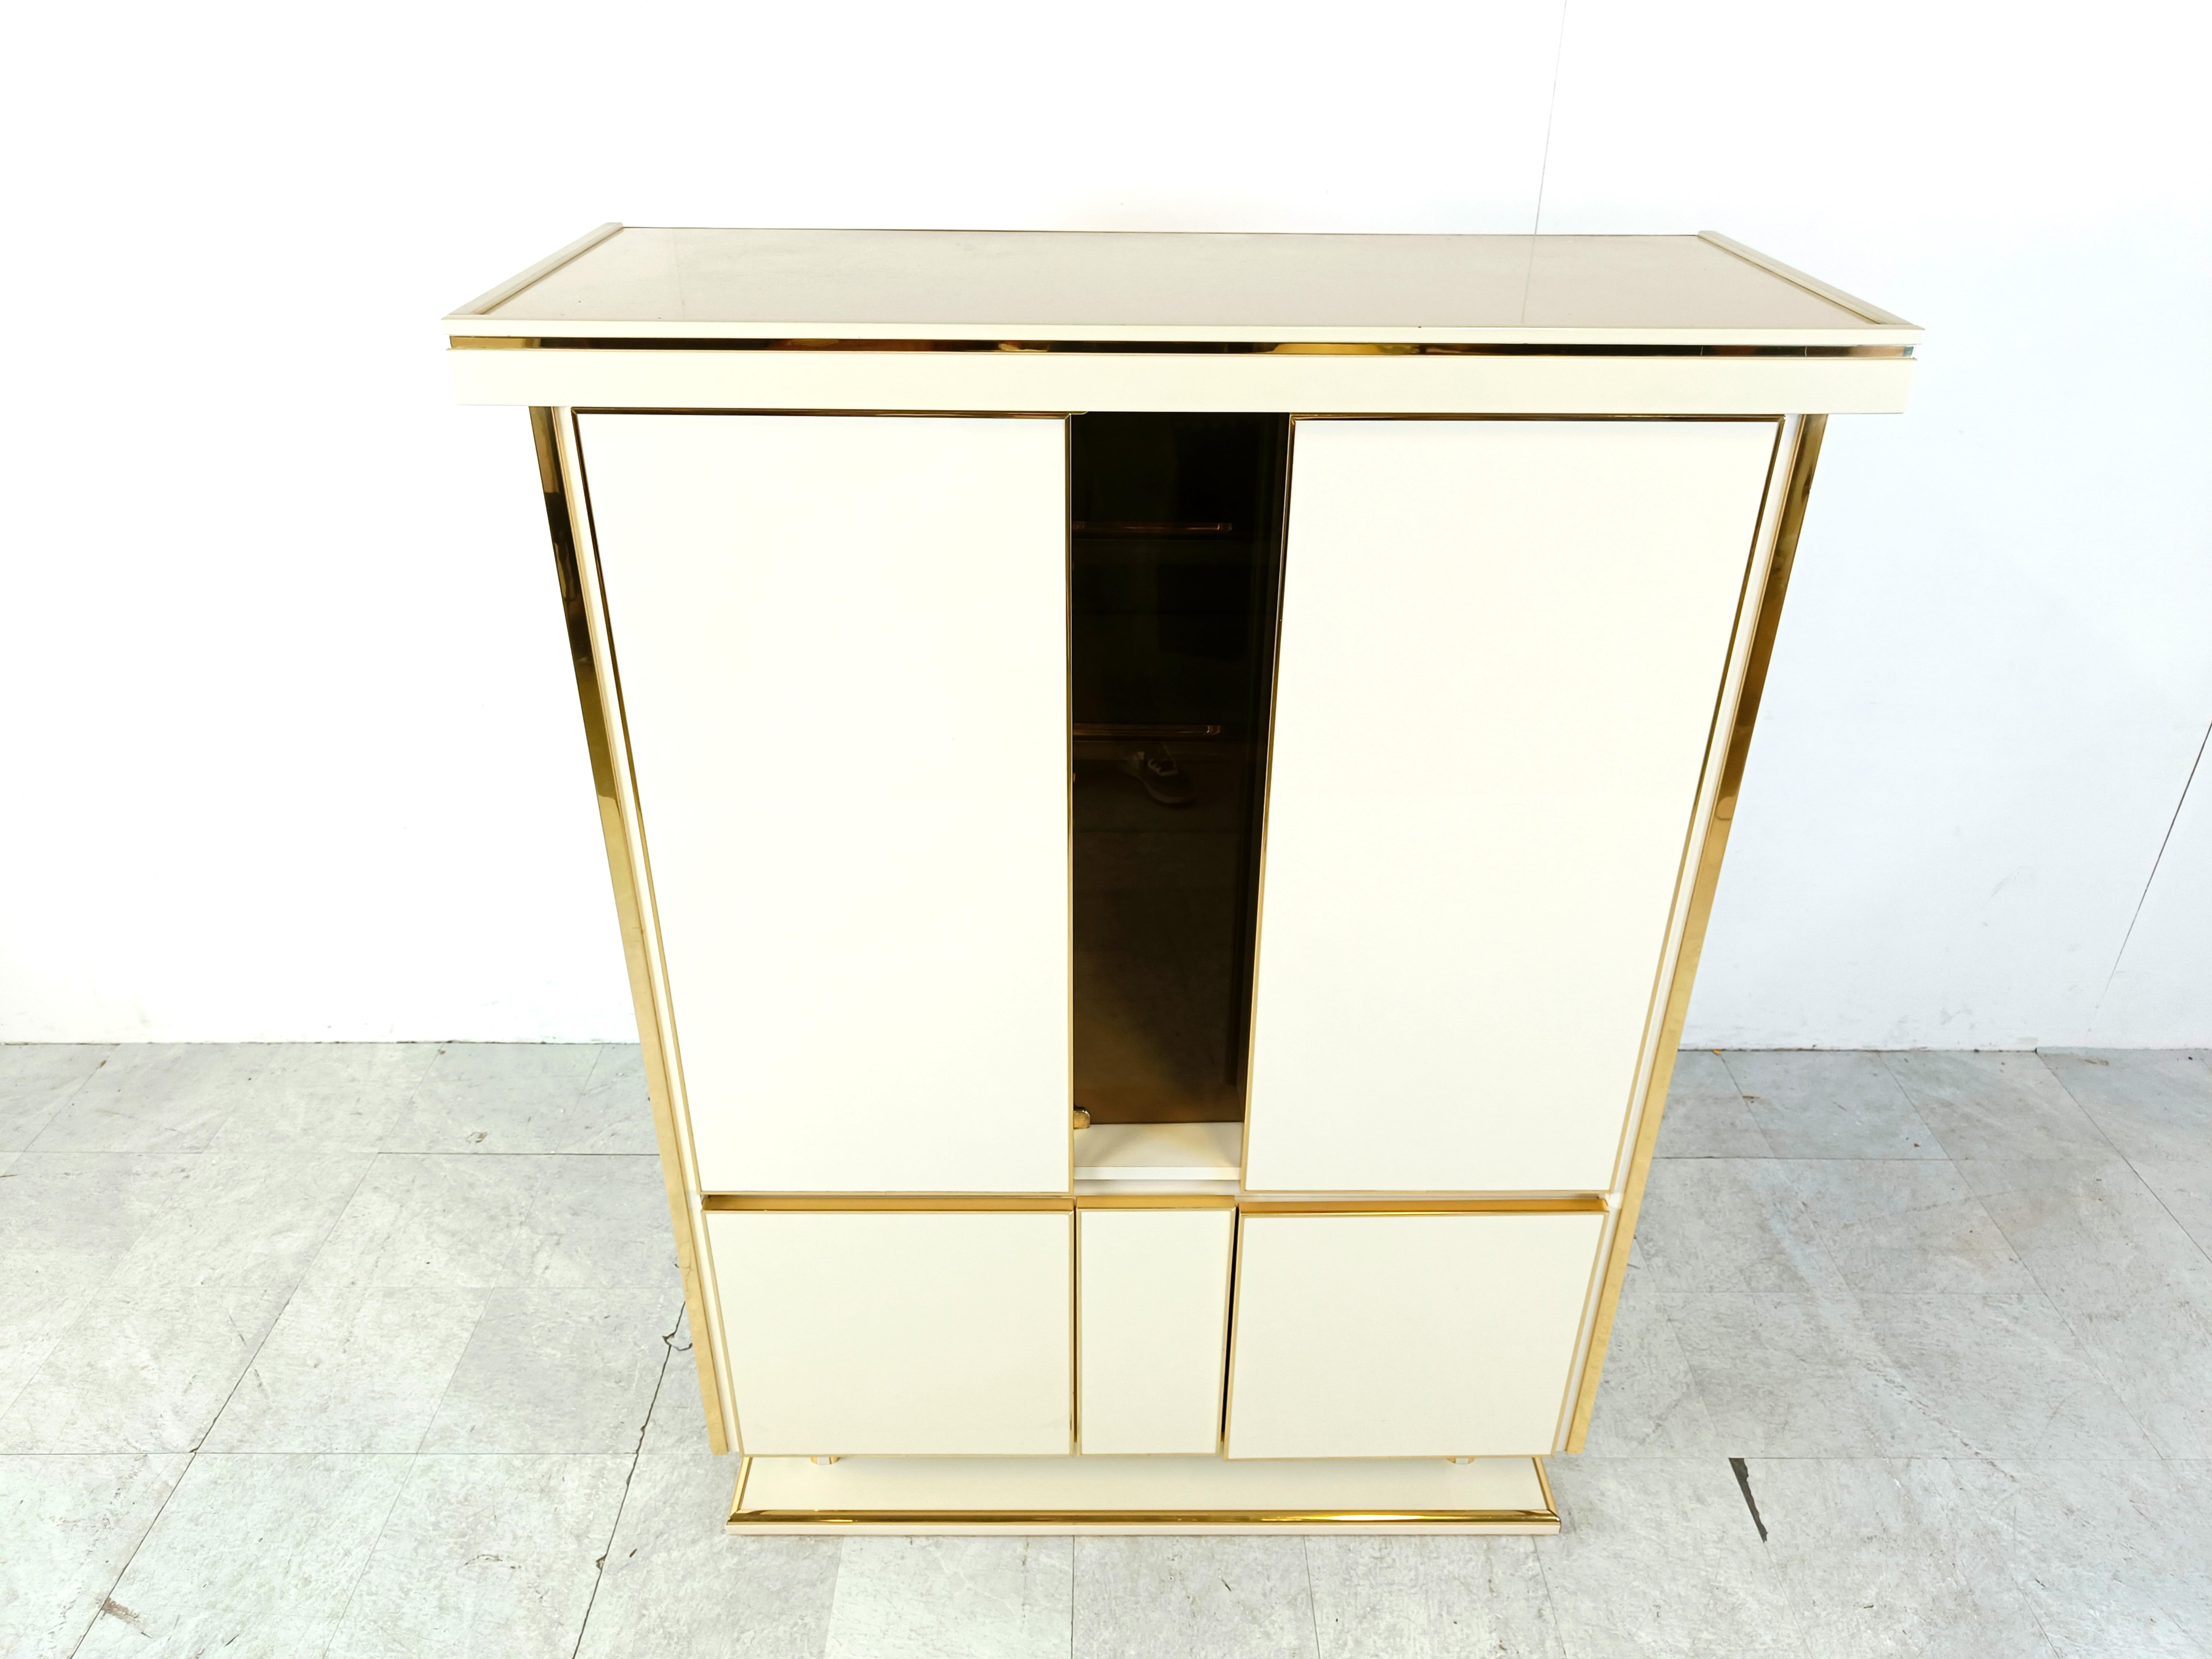 
Vintage seventies glam brass and white lacquer bar cabinet.

The bar is illuminated and offers plenty of storage space.

Glass and white wooden shelves inside.

1970s - France

Good overall condition, working light.

Dimensions:
Lenght: